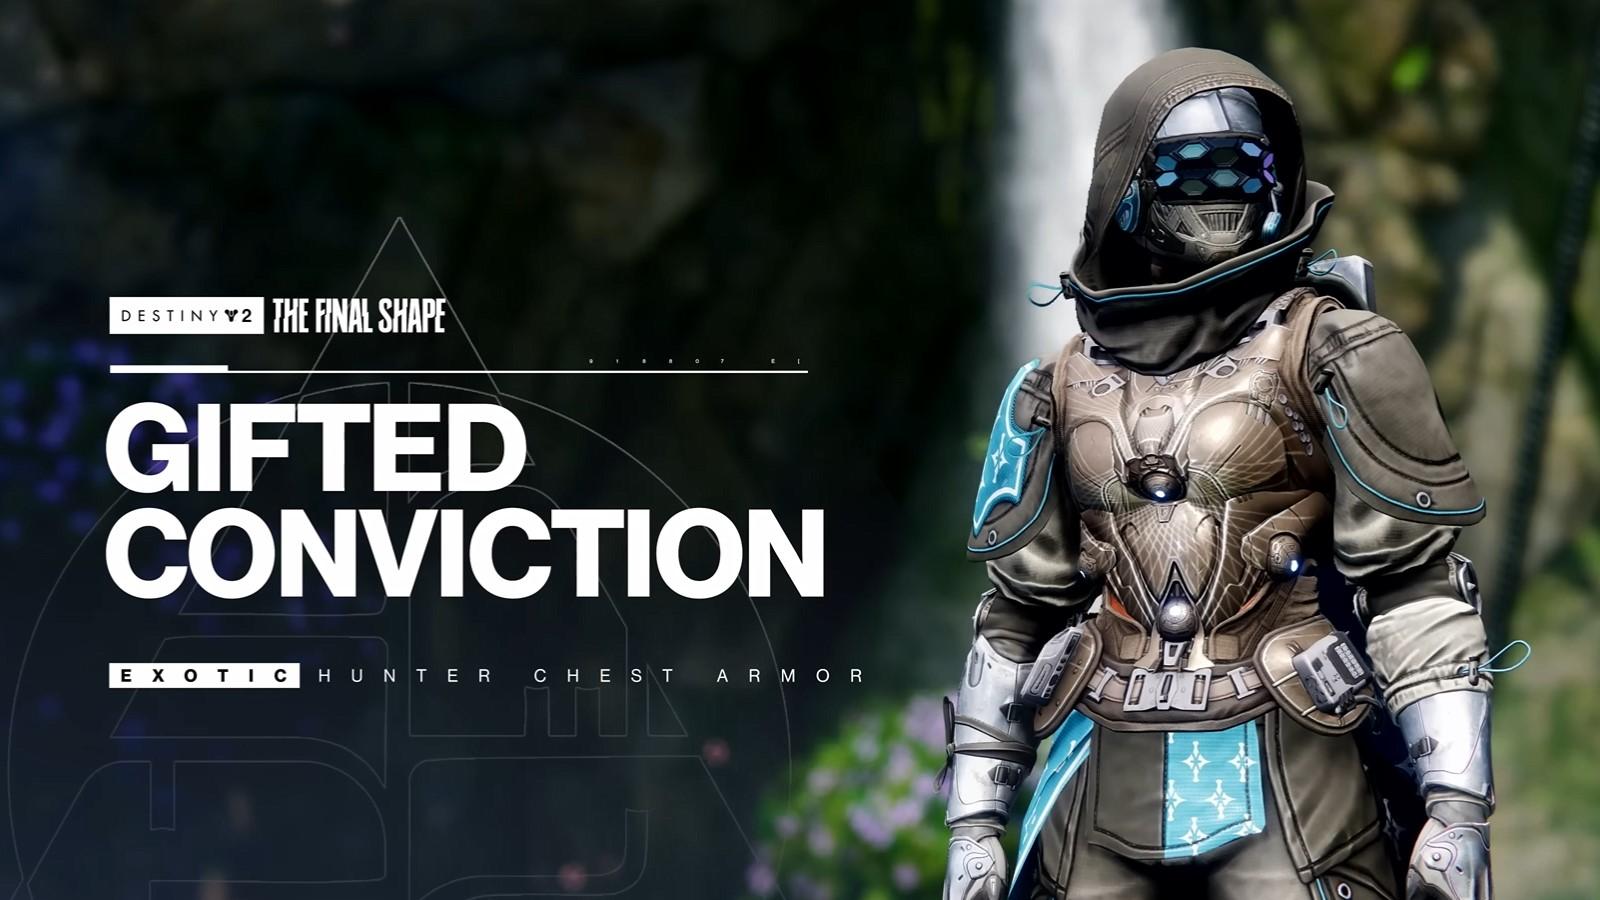 The Gifted Conviction Hunter chest Exotic in Destiny 2: The Final Shape